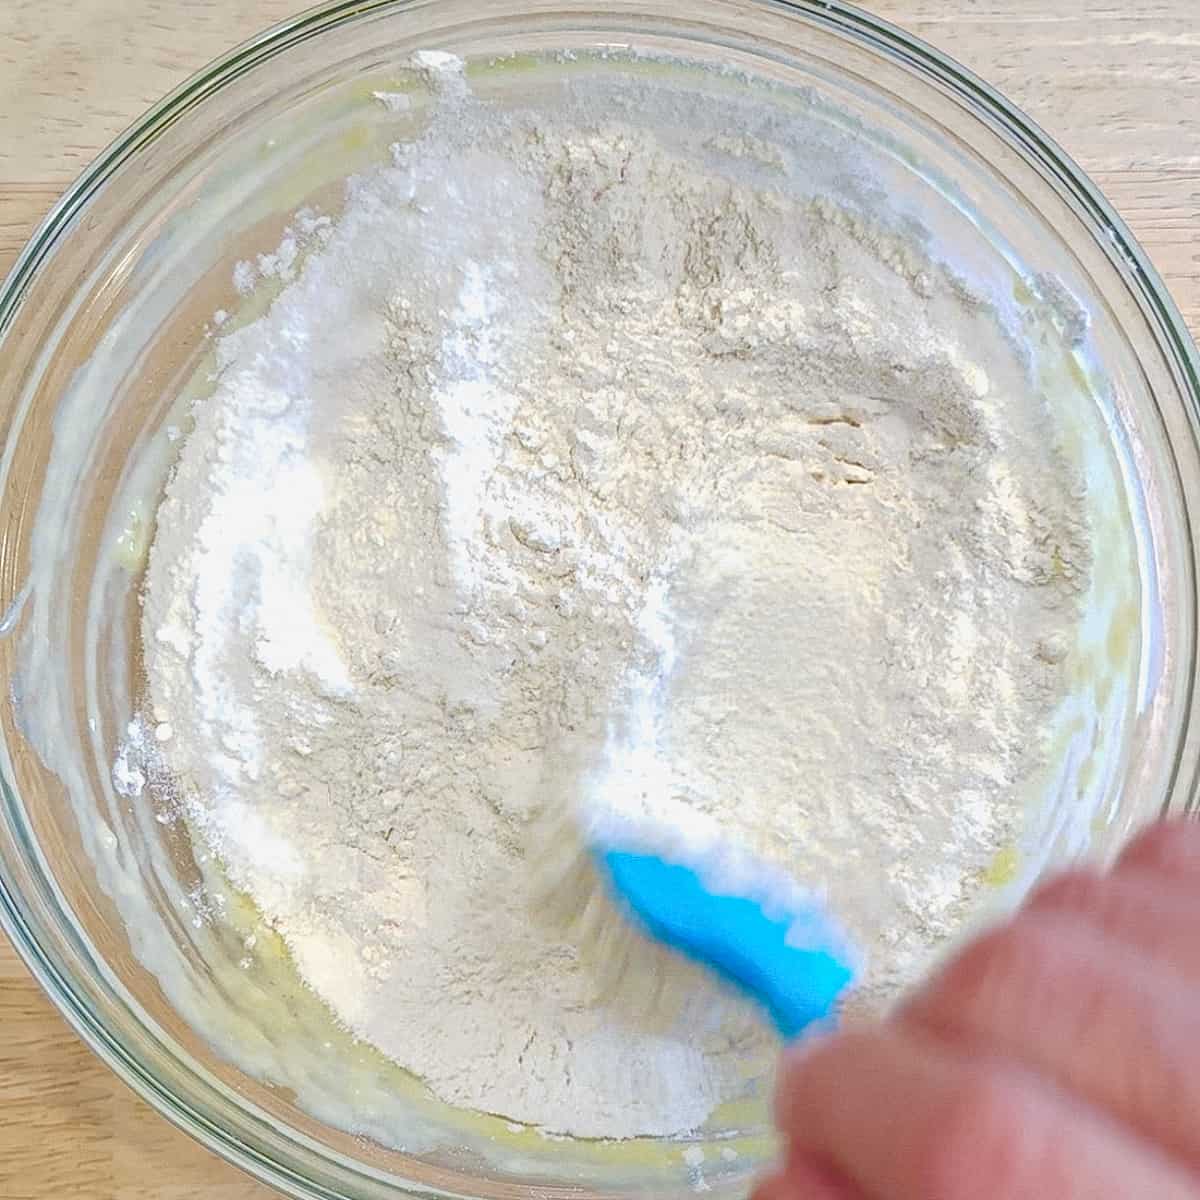 Using a spatula to mix the dry ingredients on top of muffin batter.